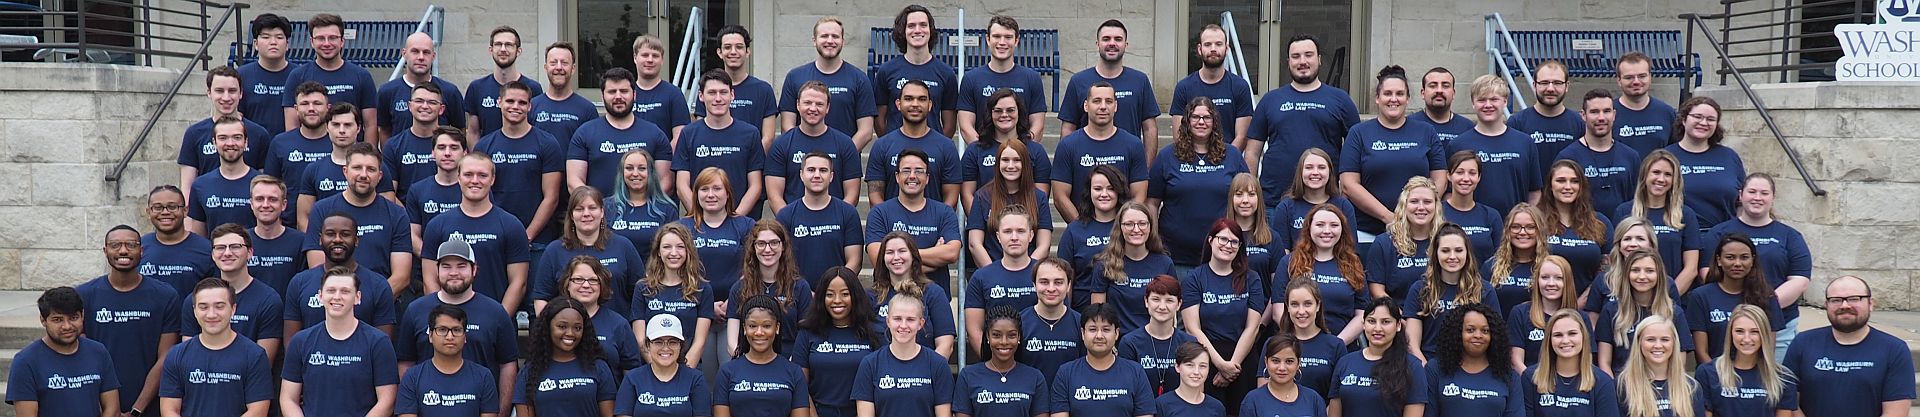 Photograph: Students starting at Washburn Law in August 2019.